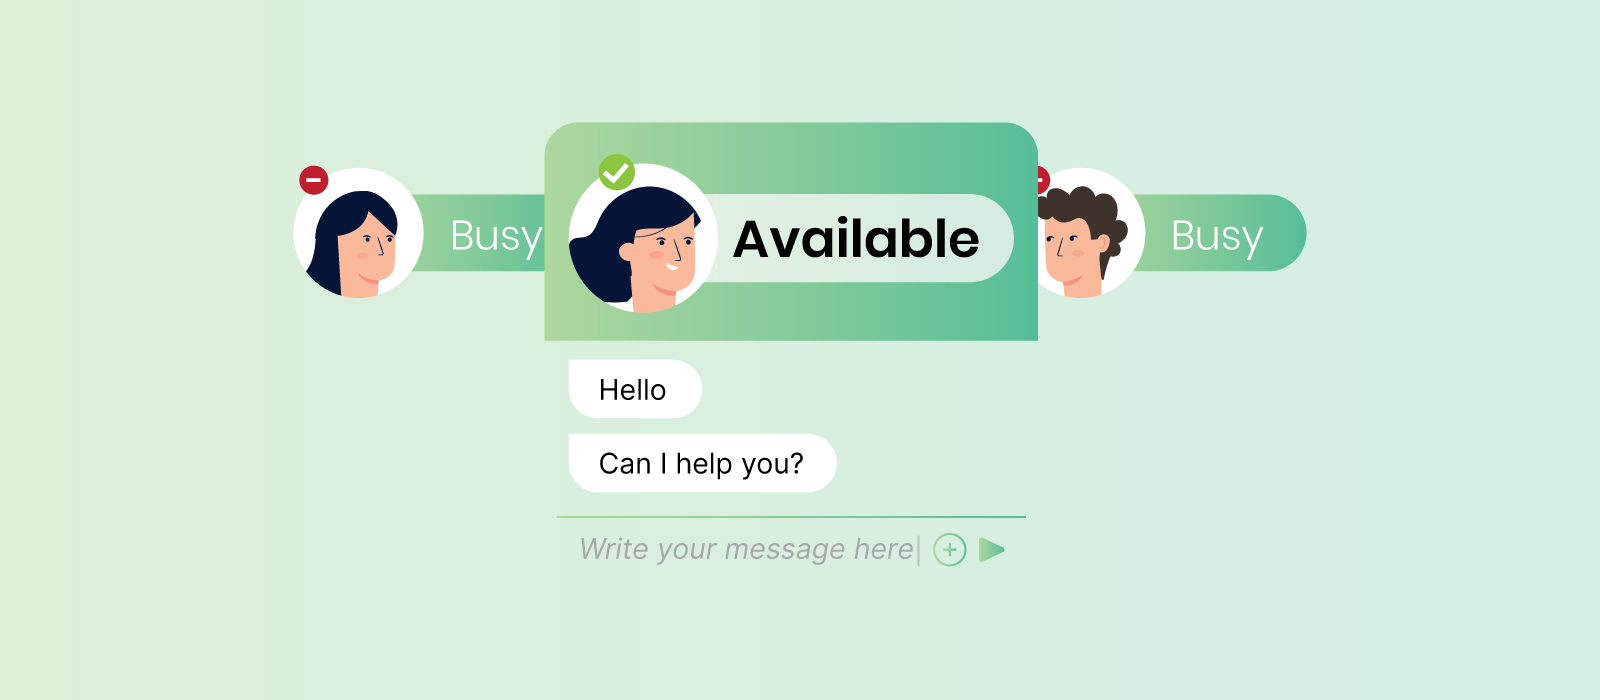 qiscus multichannel customer service chat